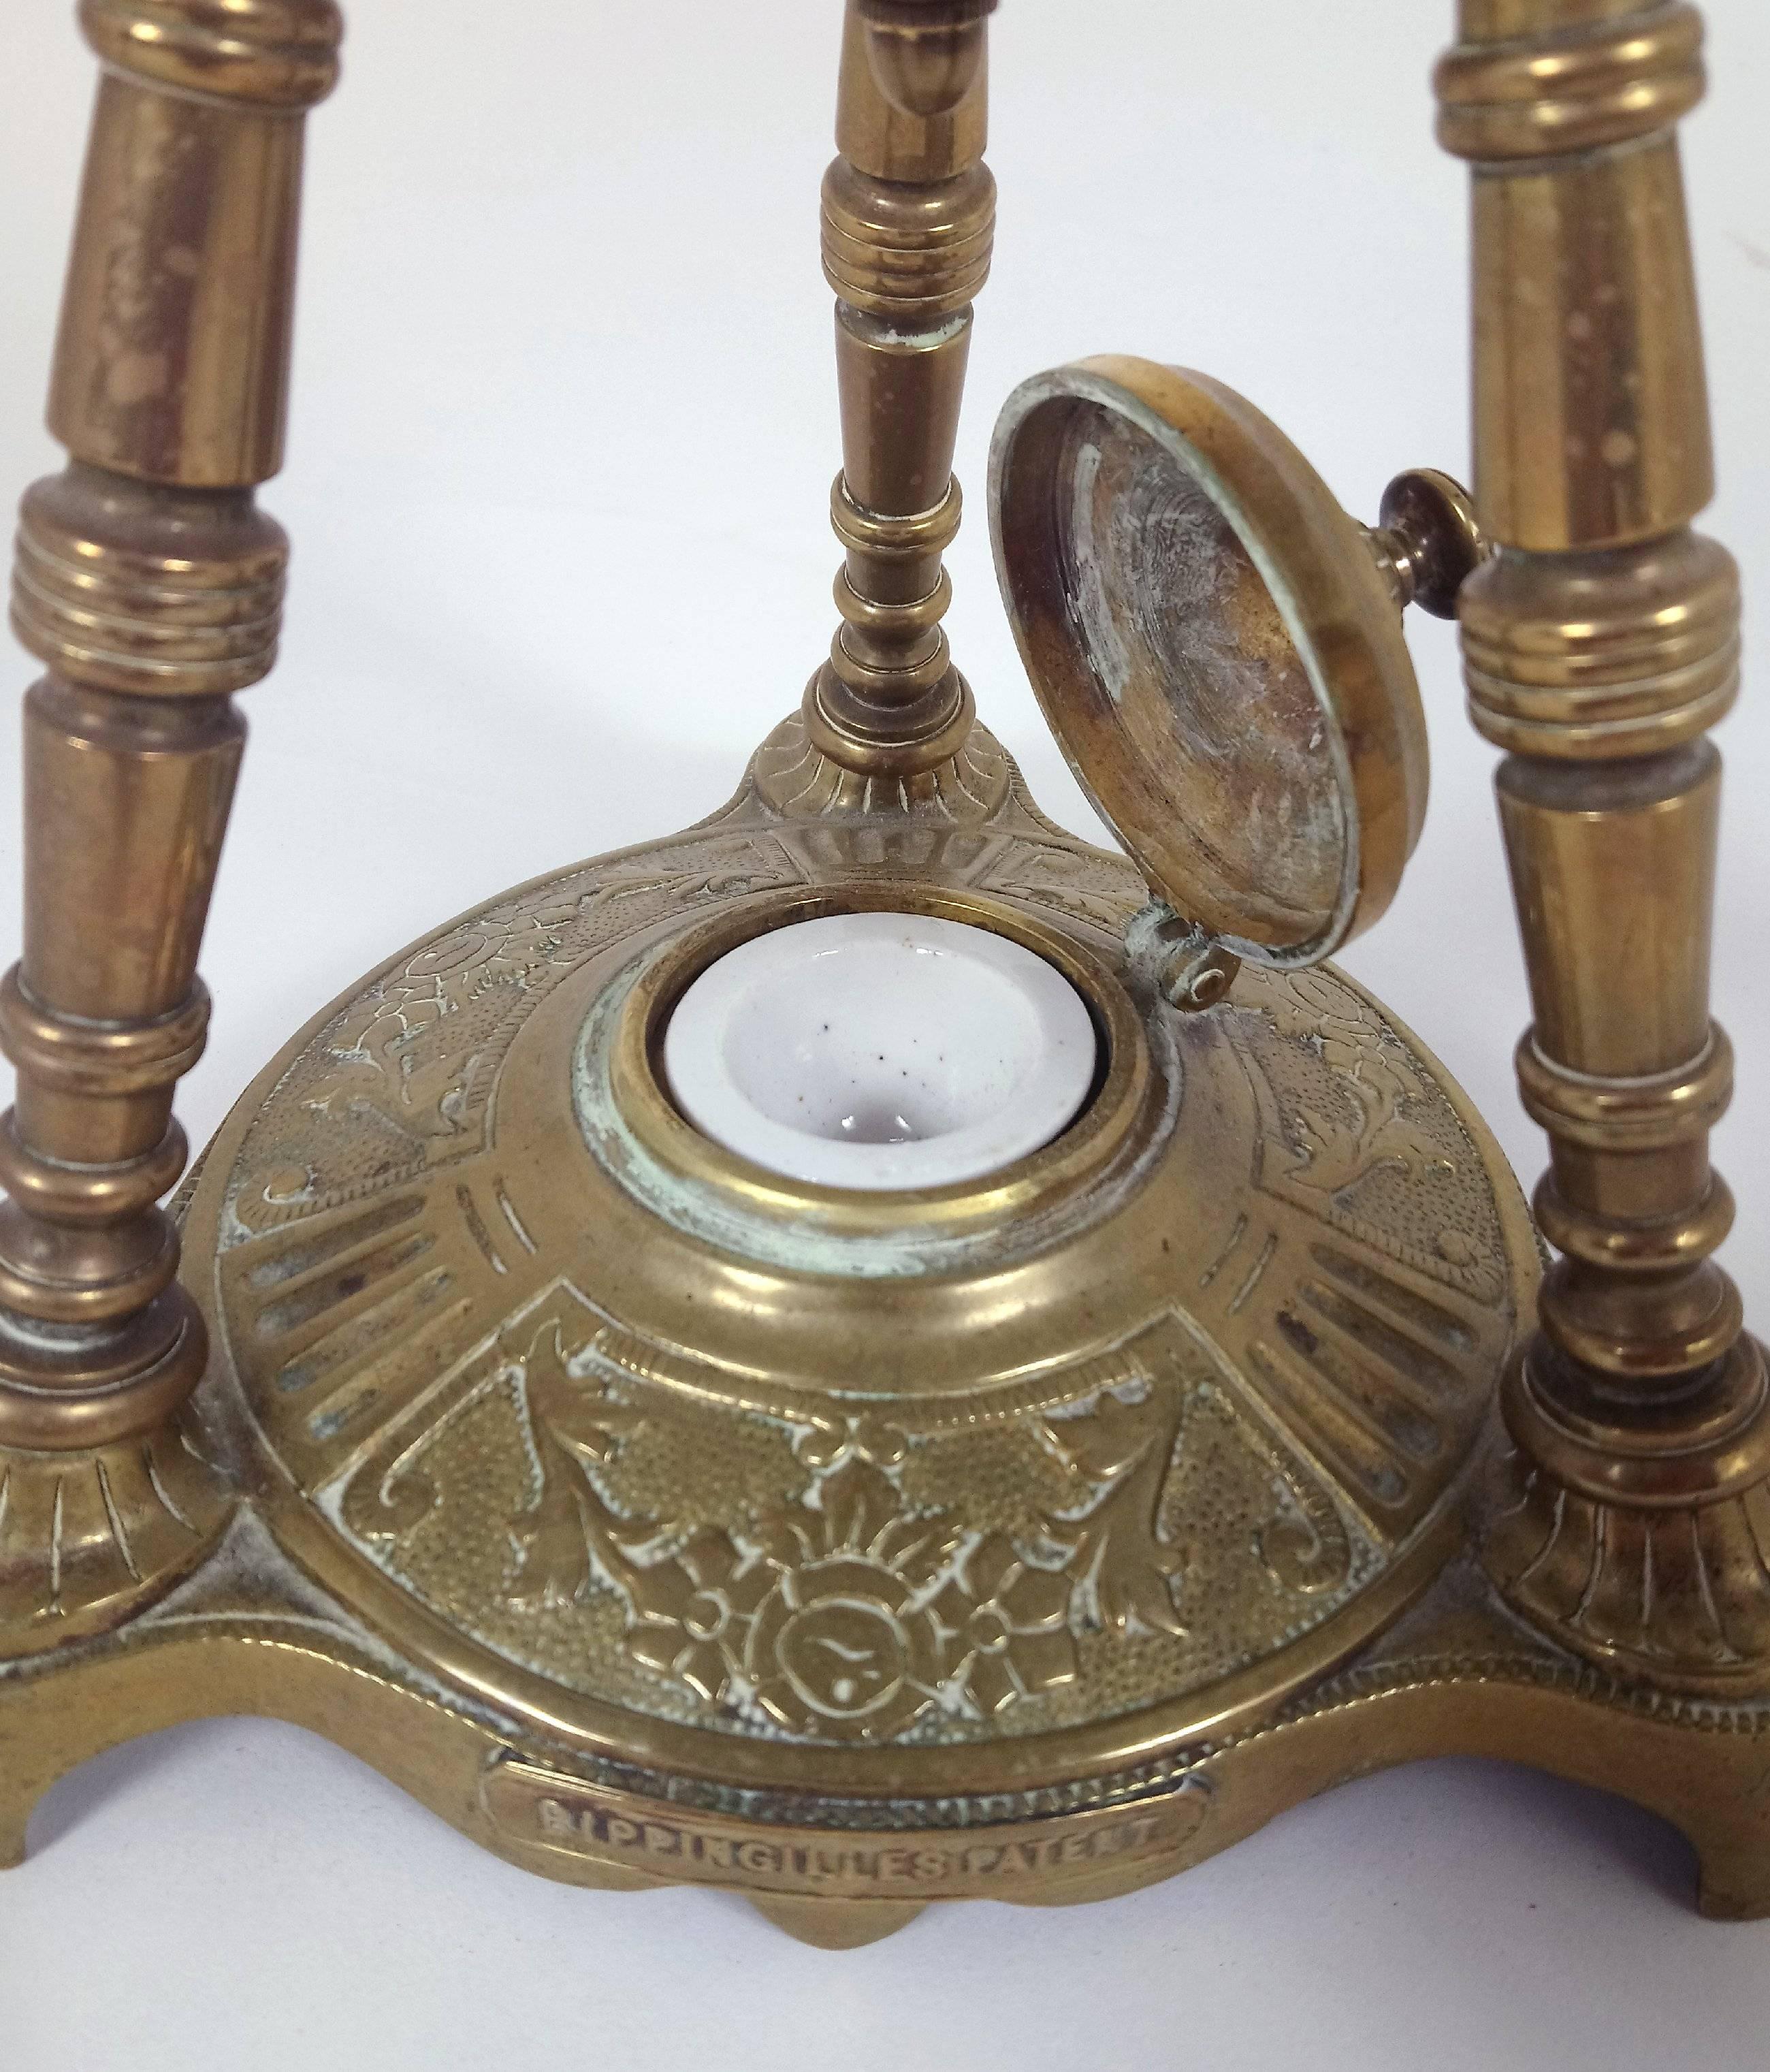 19th Century Rippingilles Patent Brass Oil Lamp In Good Condition In London, west Sussex